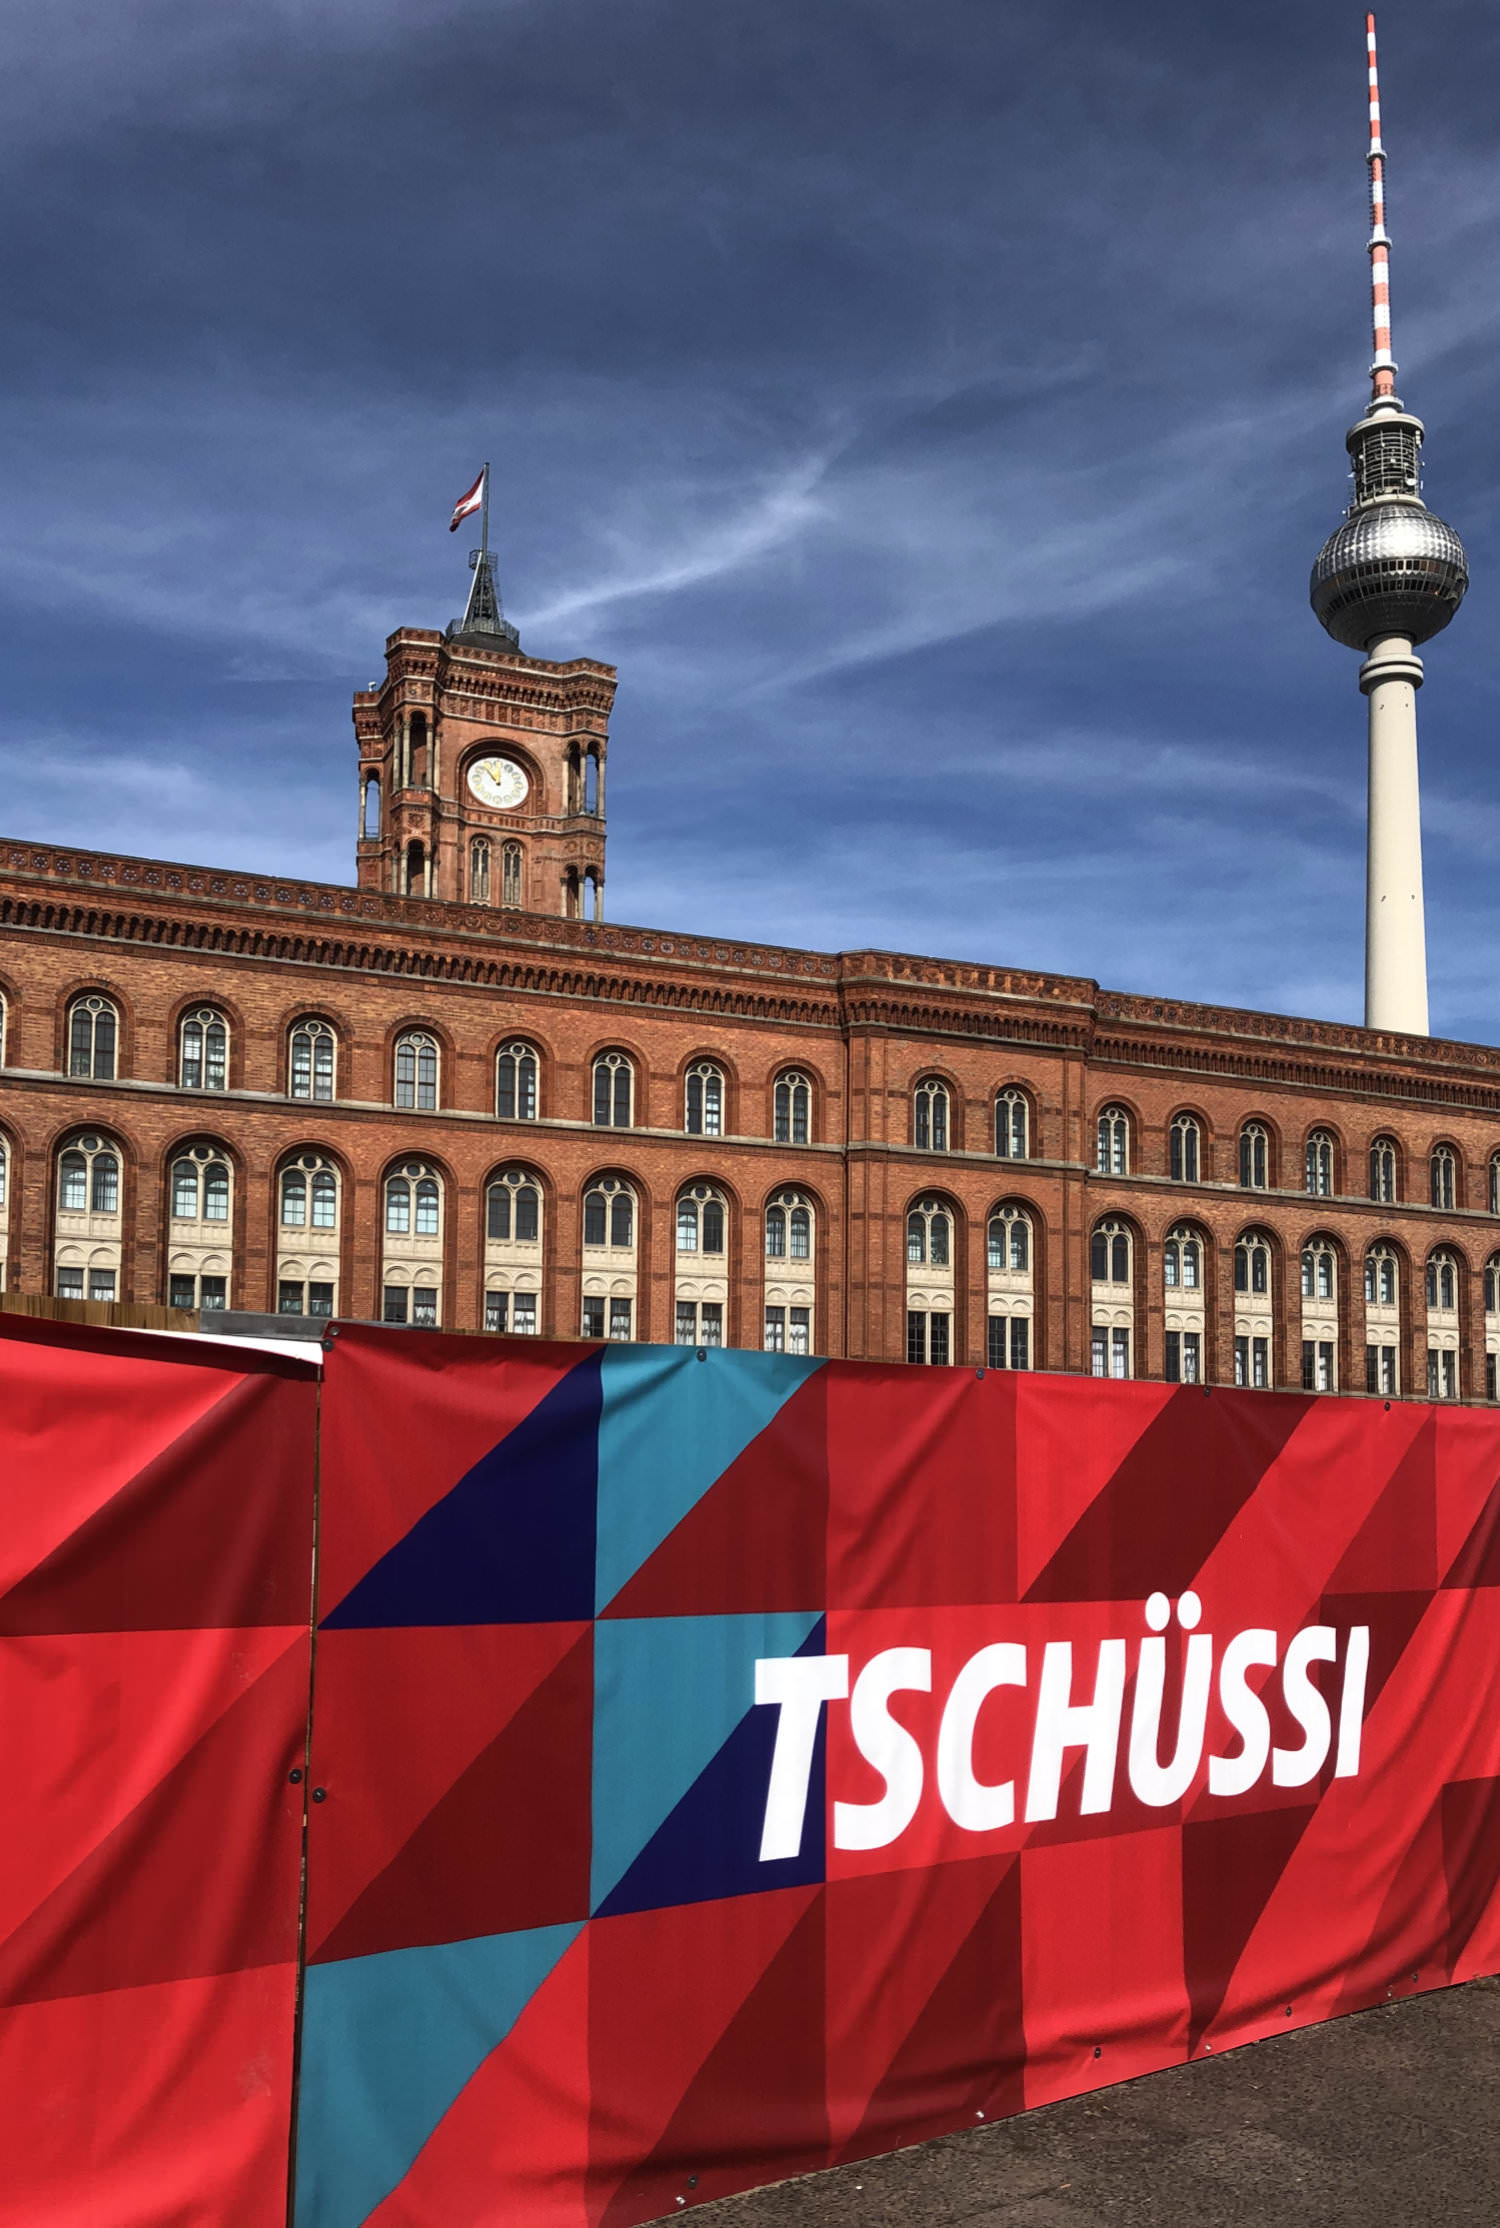 Change in use as Berlin’s corporate typeface – Facing hoarding Rotes Rathaus